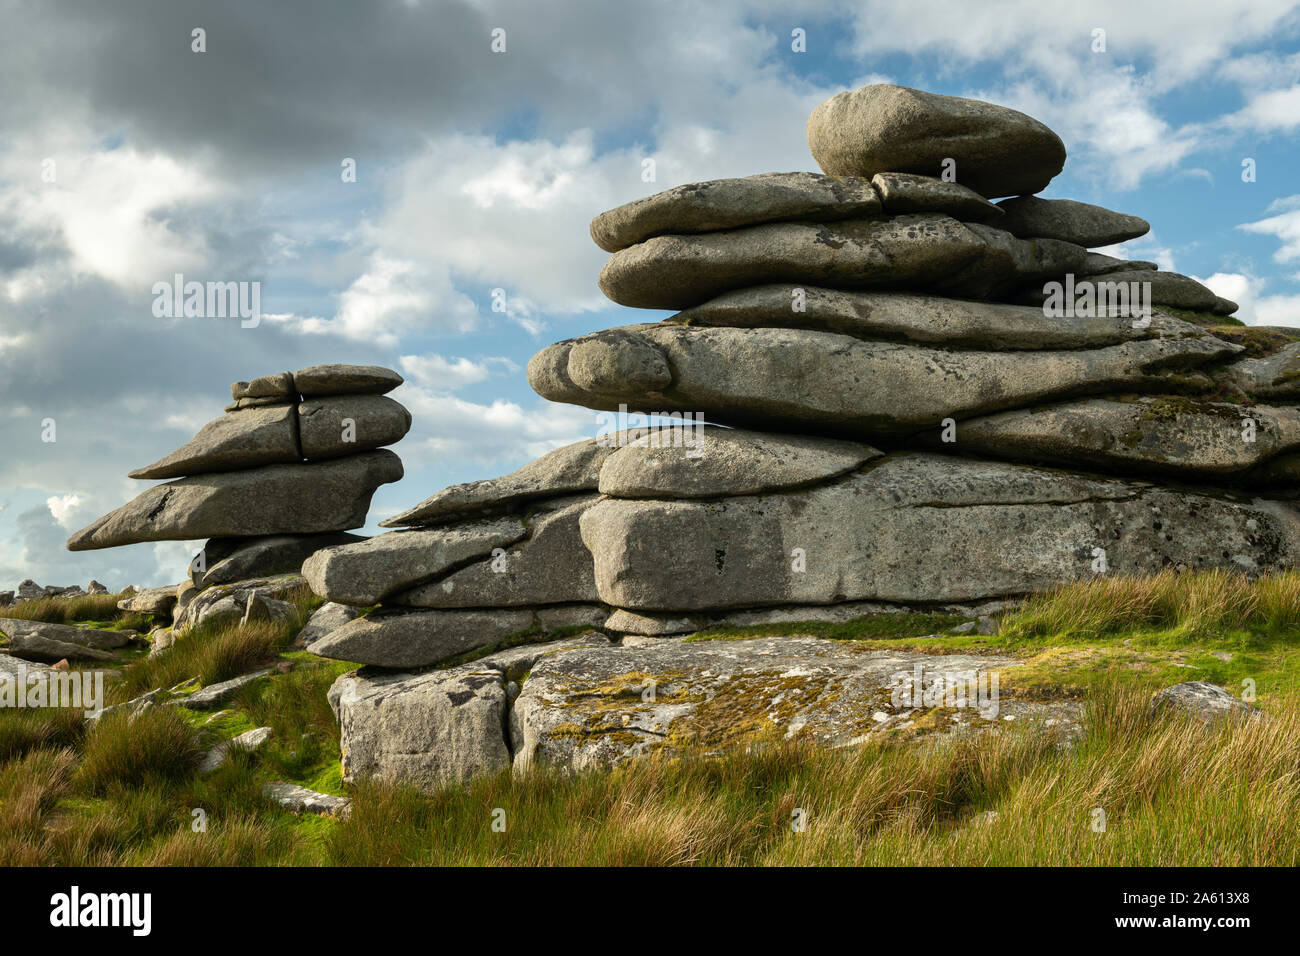 Granite outcrops on Stowes Hill in Bodmin Moor, Minions, Cornwall, England, United Kingdom, Europe Stock Photo